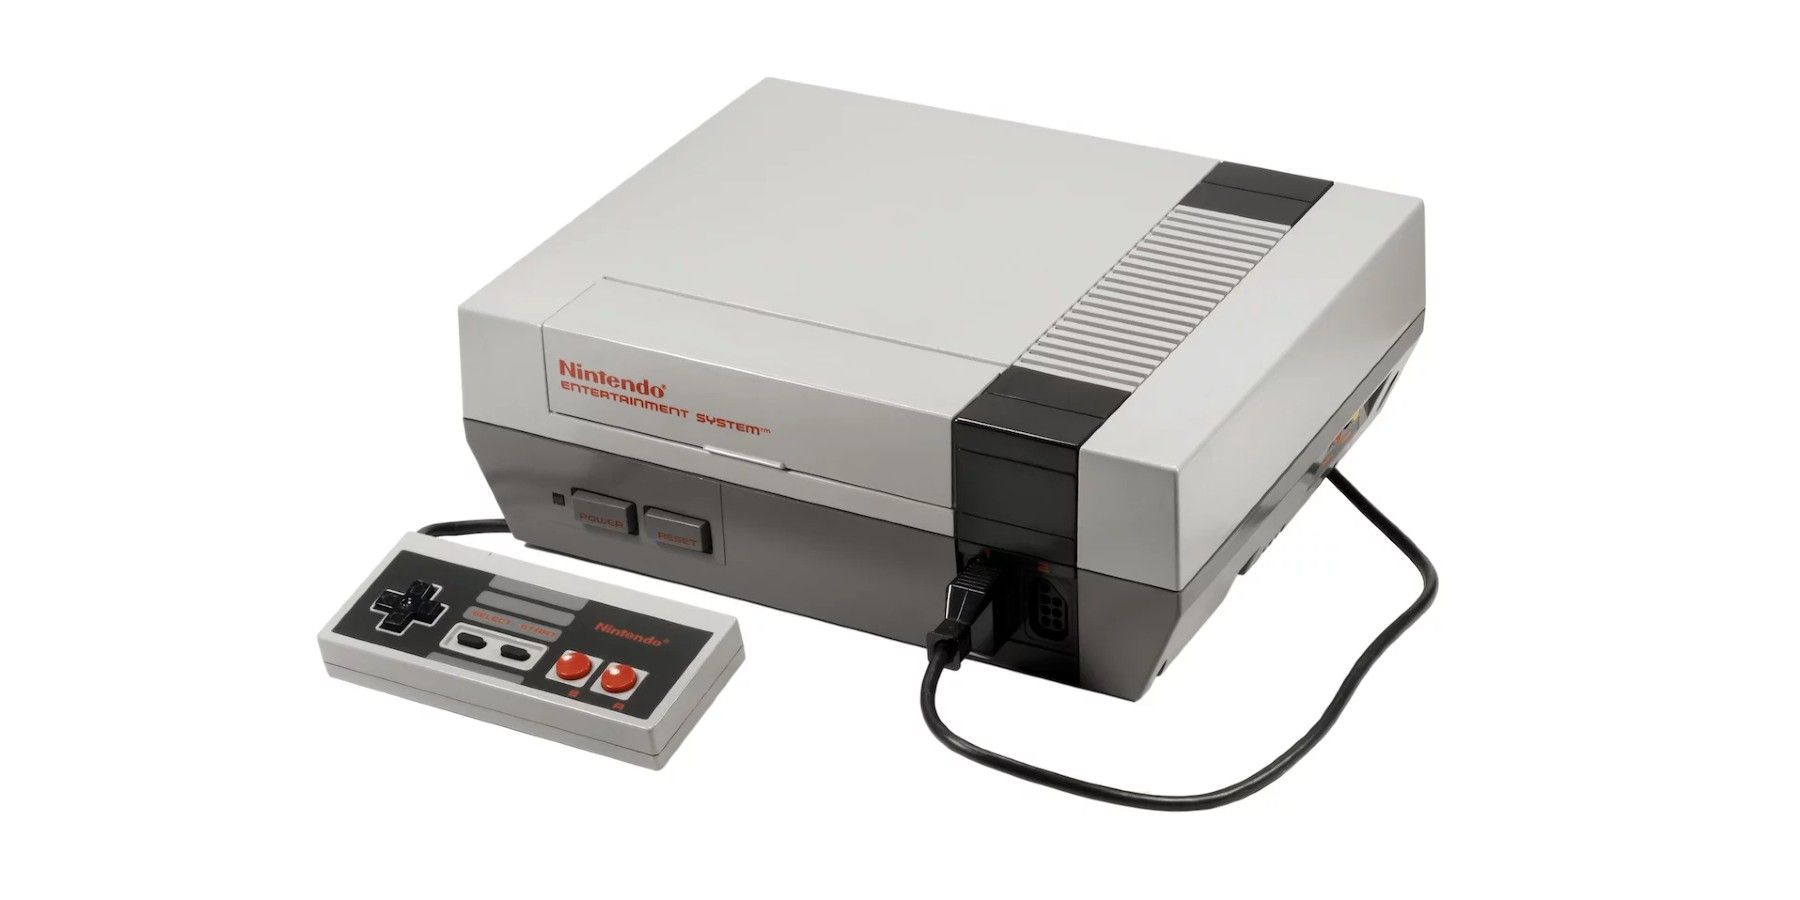 Unreleased NES Games Hit Ebay for Thousands of Dollars